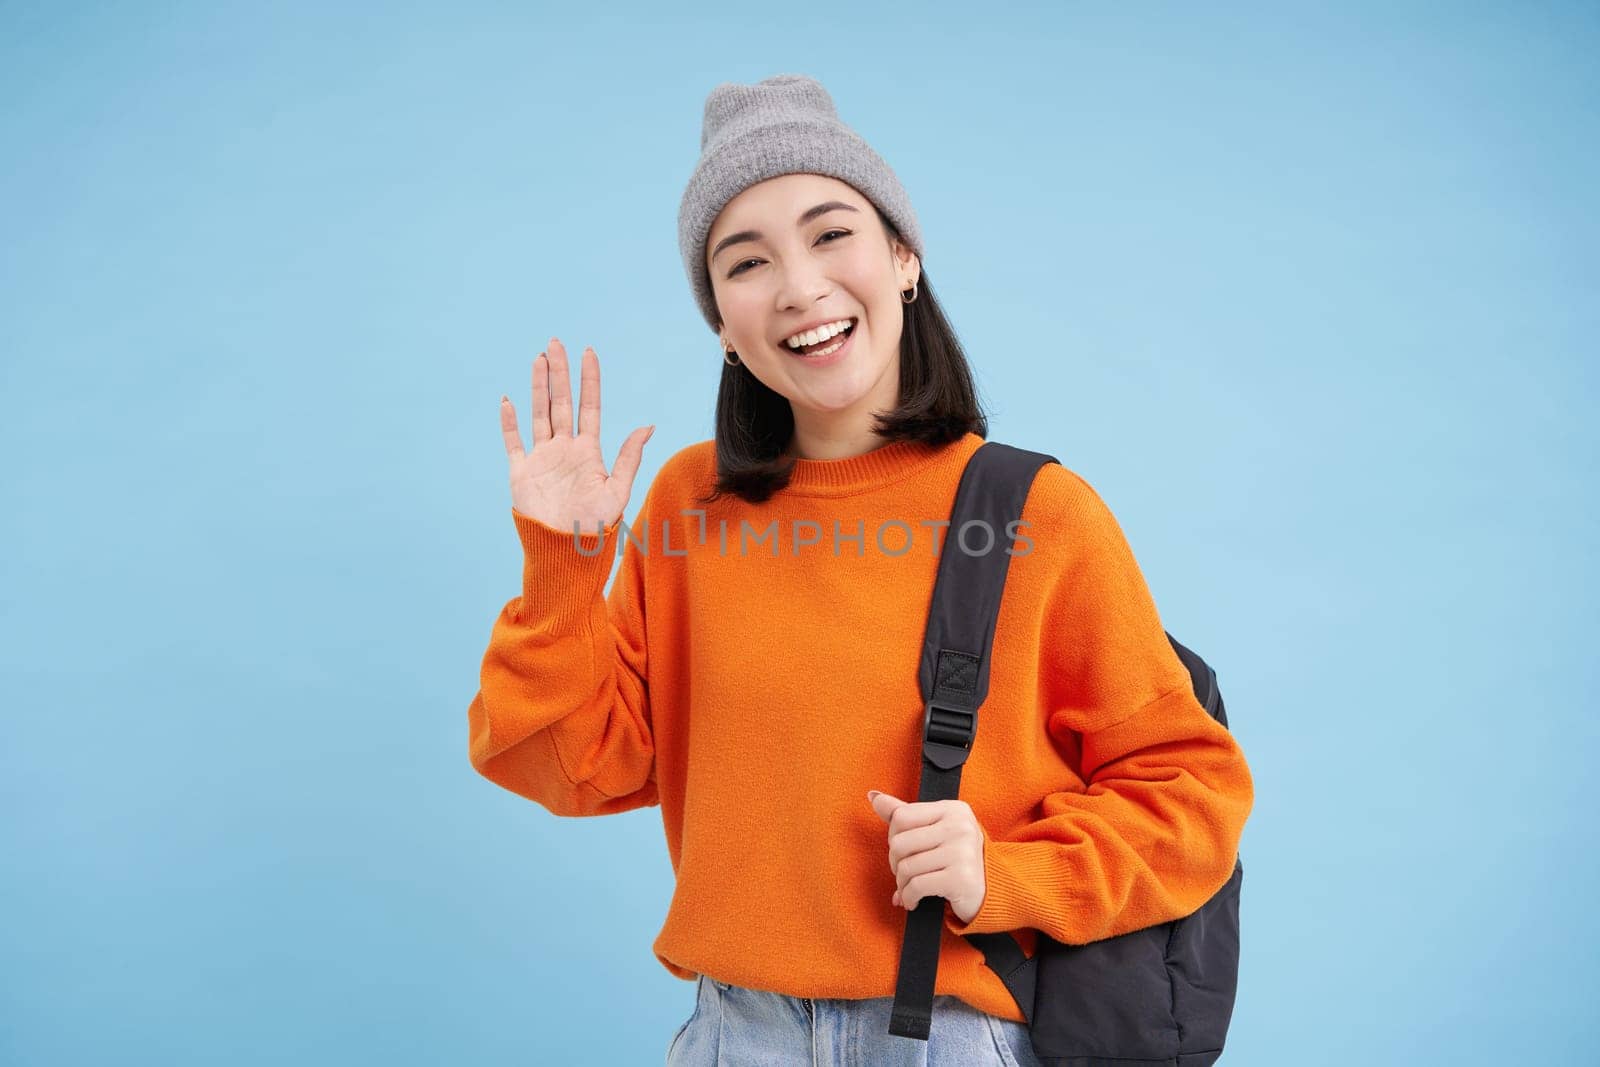 Friendly girl says hello, holds backpack and waves hand, greets you and laughs, stands over blue background.